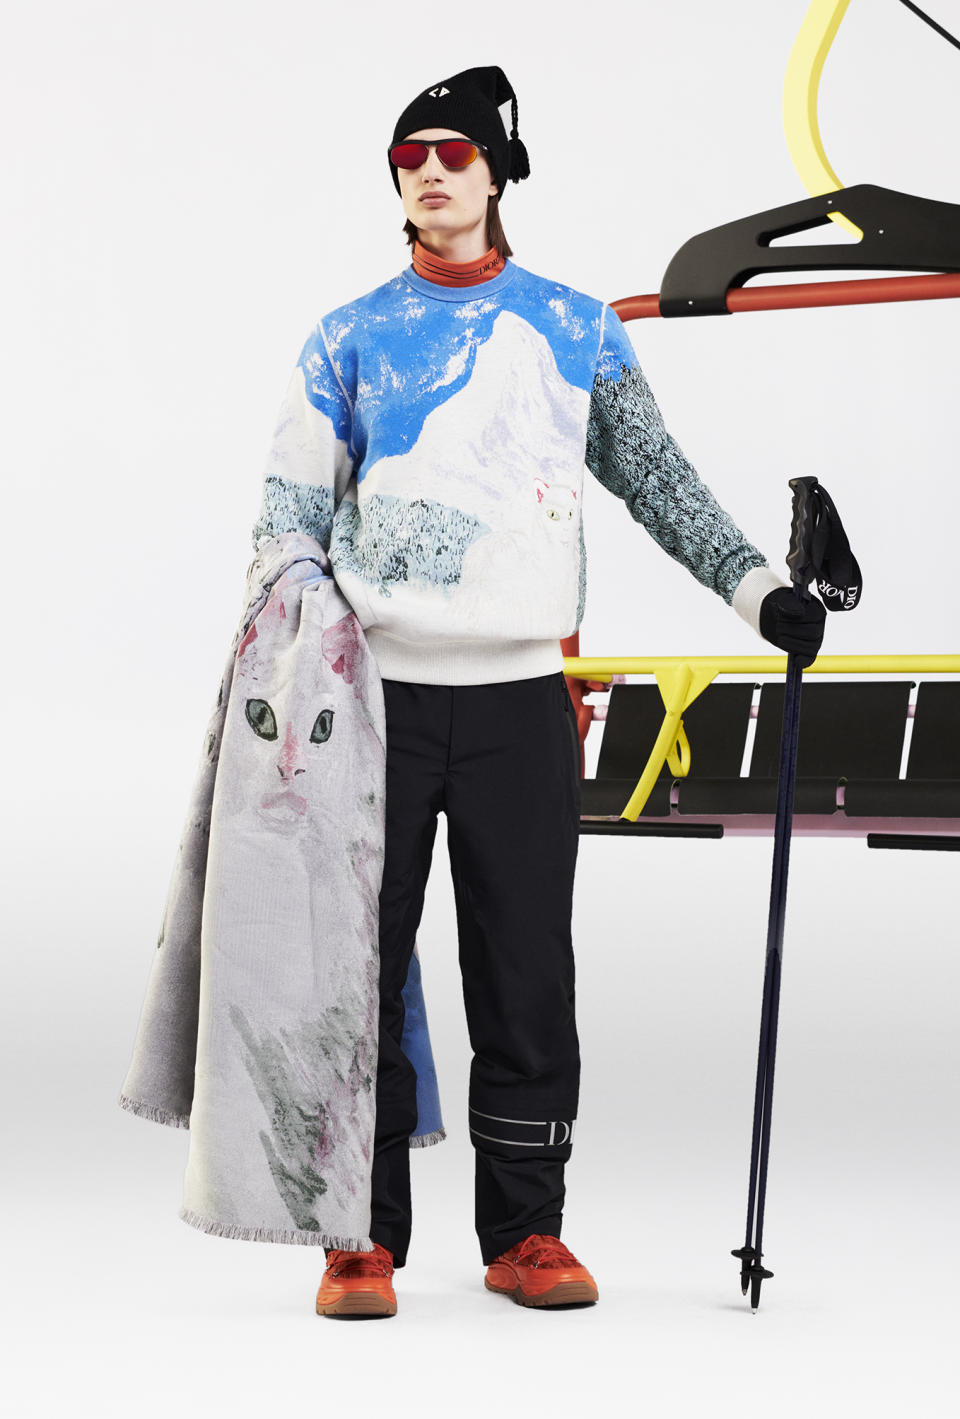 A look from Dior’s men’s ski capsule line designed with Peter Doig. - Credit: Brett Lloyd/Courtesy of Dior